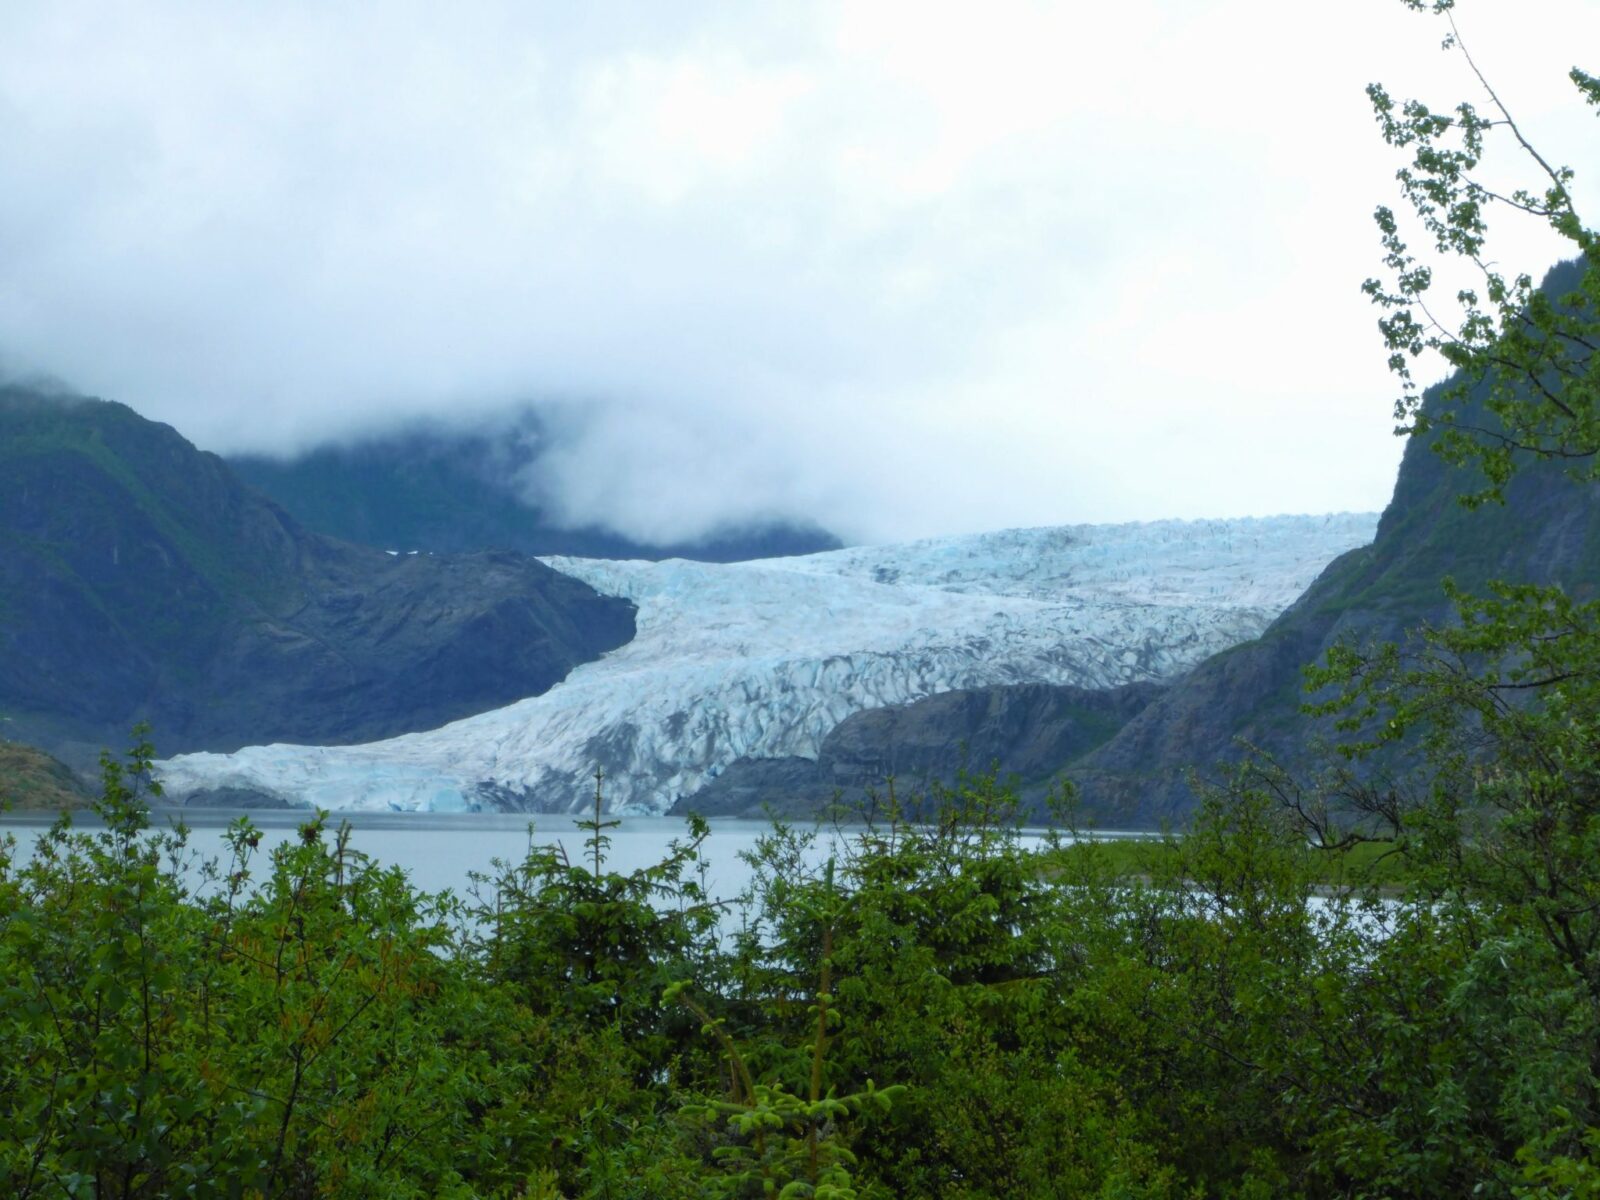 Things to do in Juneau include a visit to the Mendenhall Glacier, which is seen in the distance behind a lake. Around the glacier are rocky hillsides covered in thick, dark clouds. There are green trees and bushes in the foreground